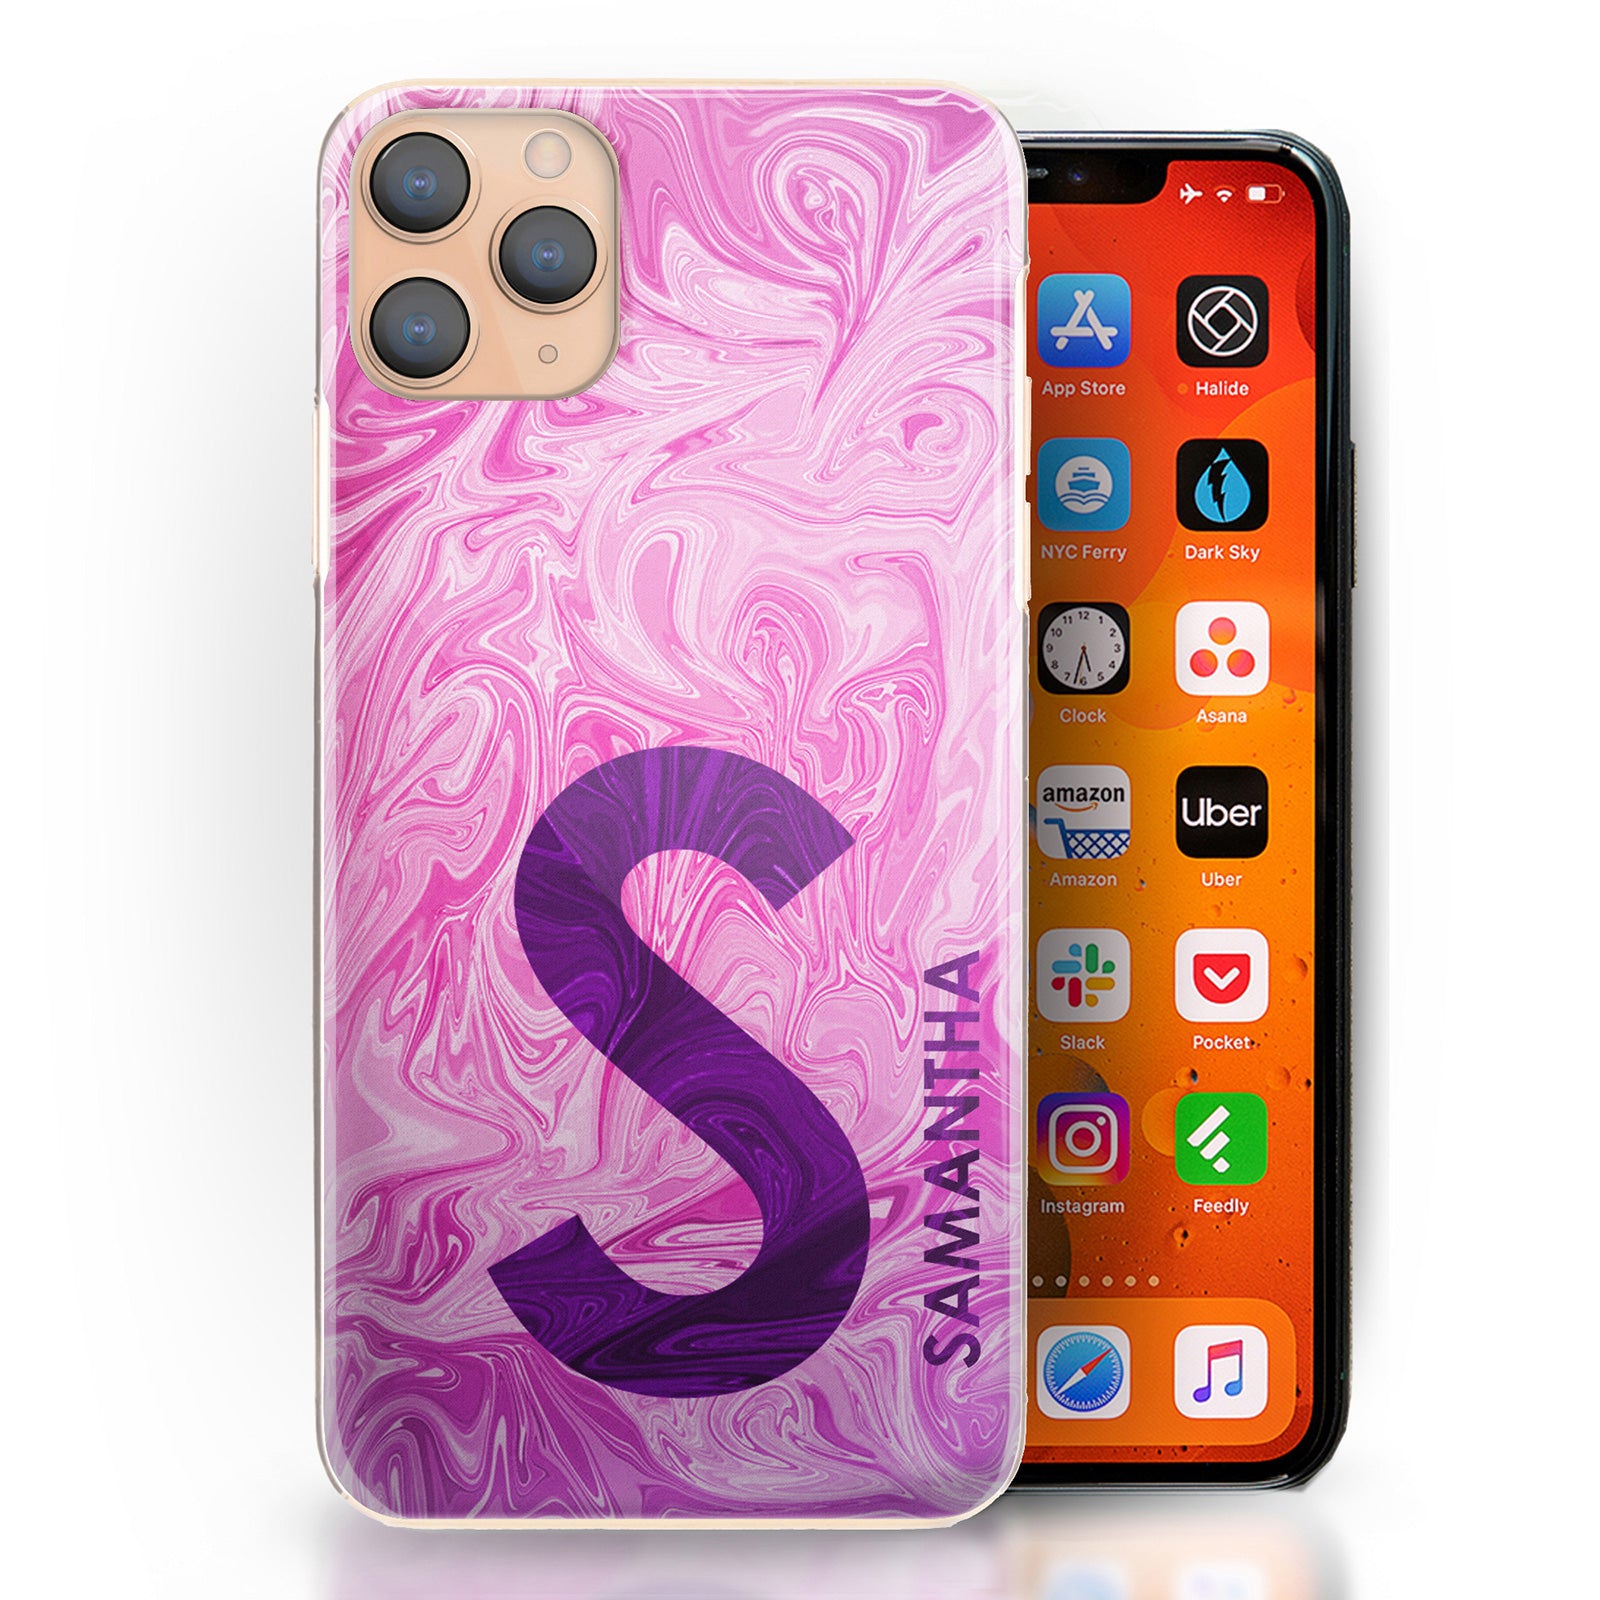 Personalised HTC Phone Hard Case with Purple Text and Initial on Pink Swirled Marble